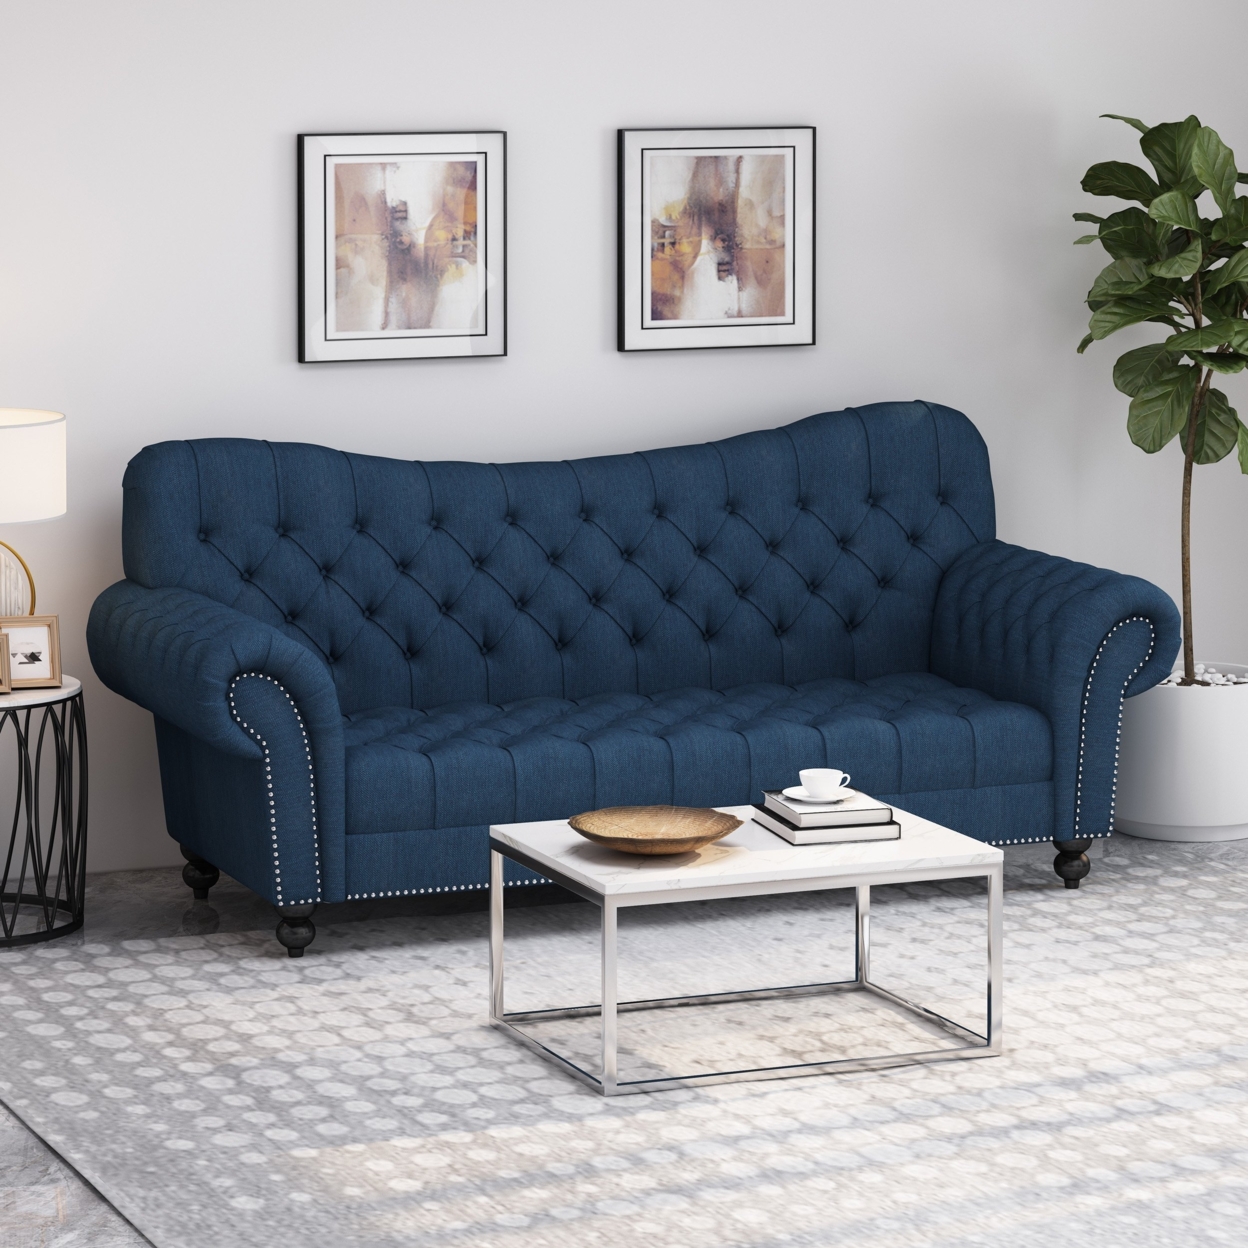 Emeric Chesterfield Button Tufted Fabric 3 Seater Sofa - Navy Blue